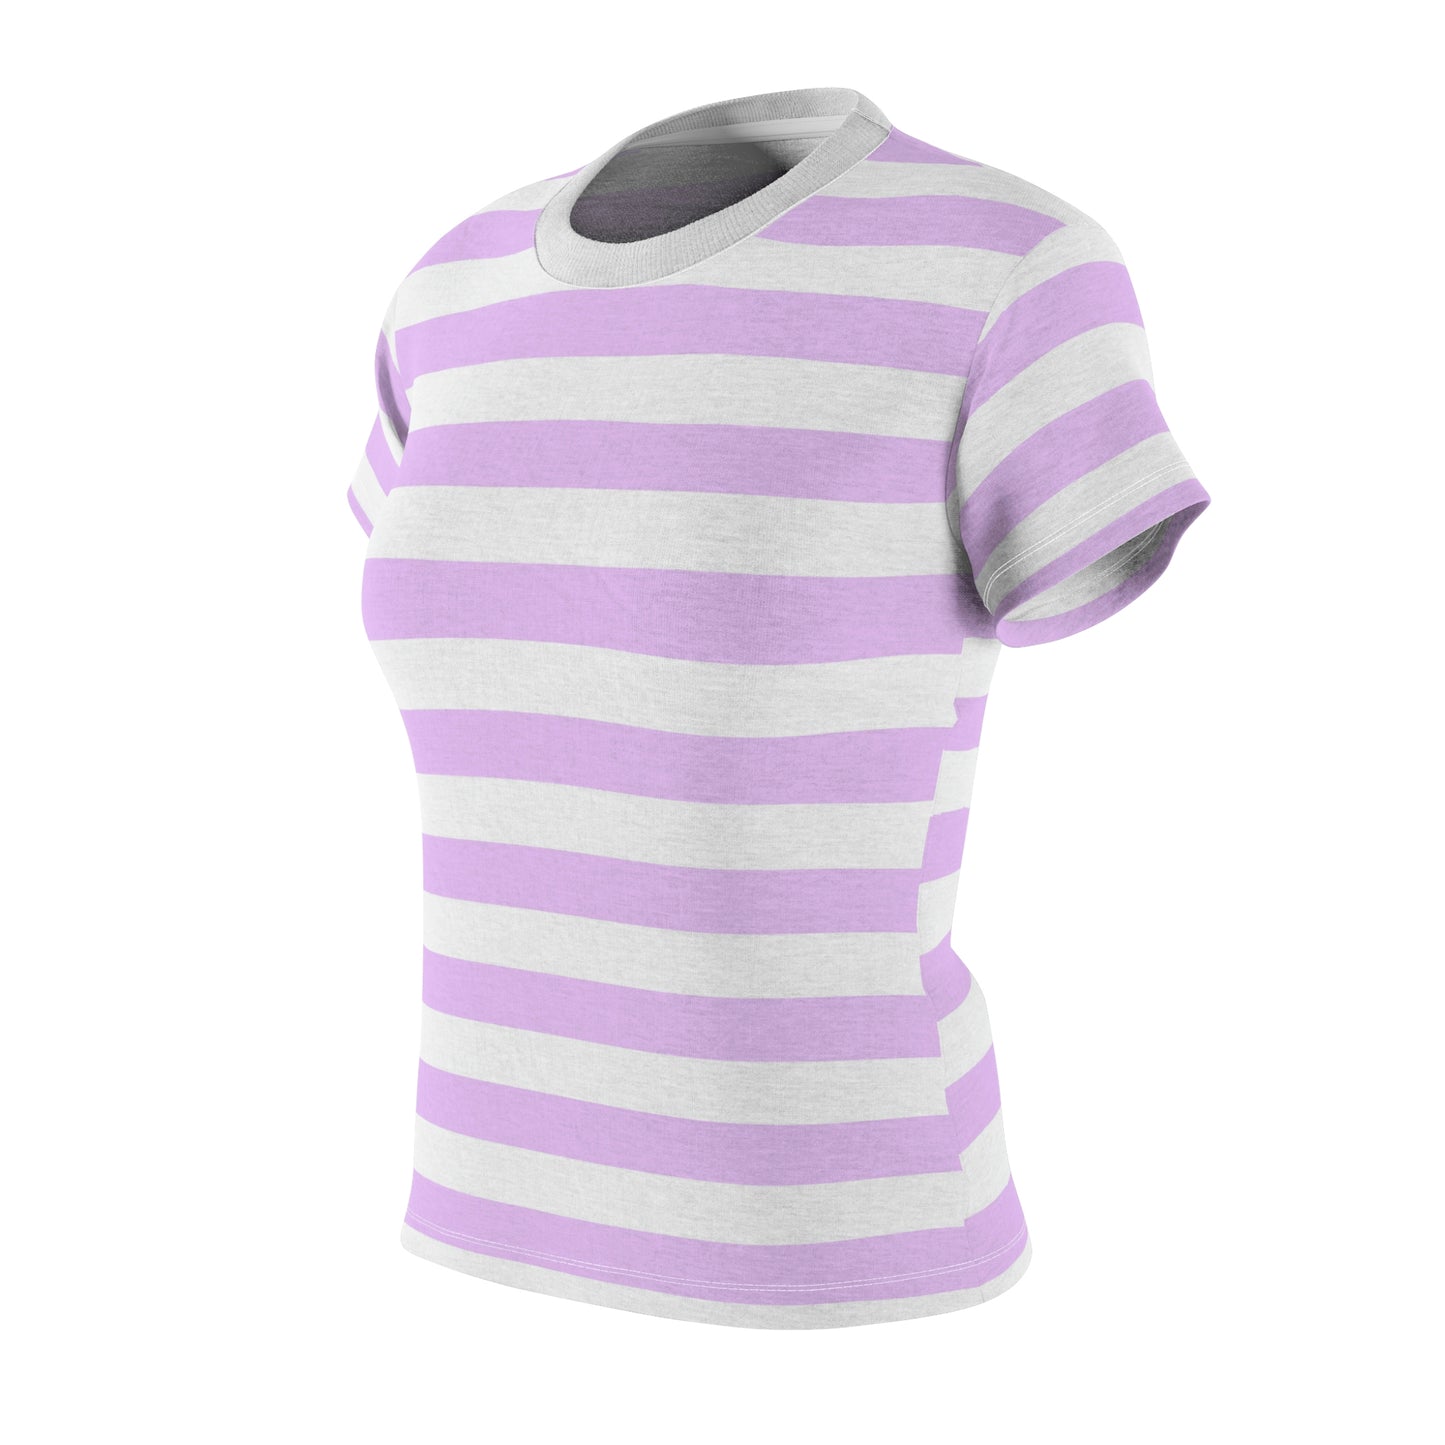 Purple and White Striped Women Tshirt, Vintage Retro Pink Designer Adult Graphic Aesthetic Fashion Fitted Crewneck Tee Shirt Top Starcove Fashion